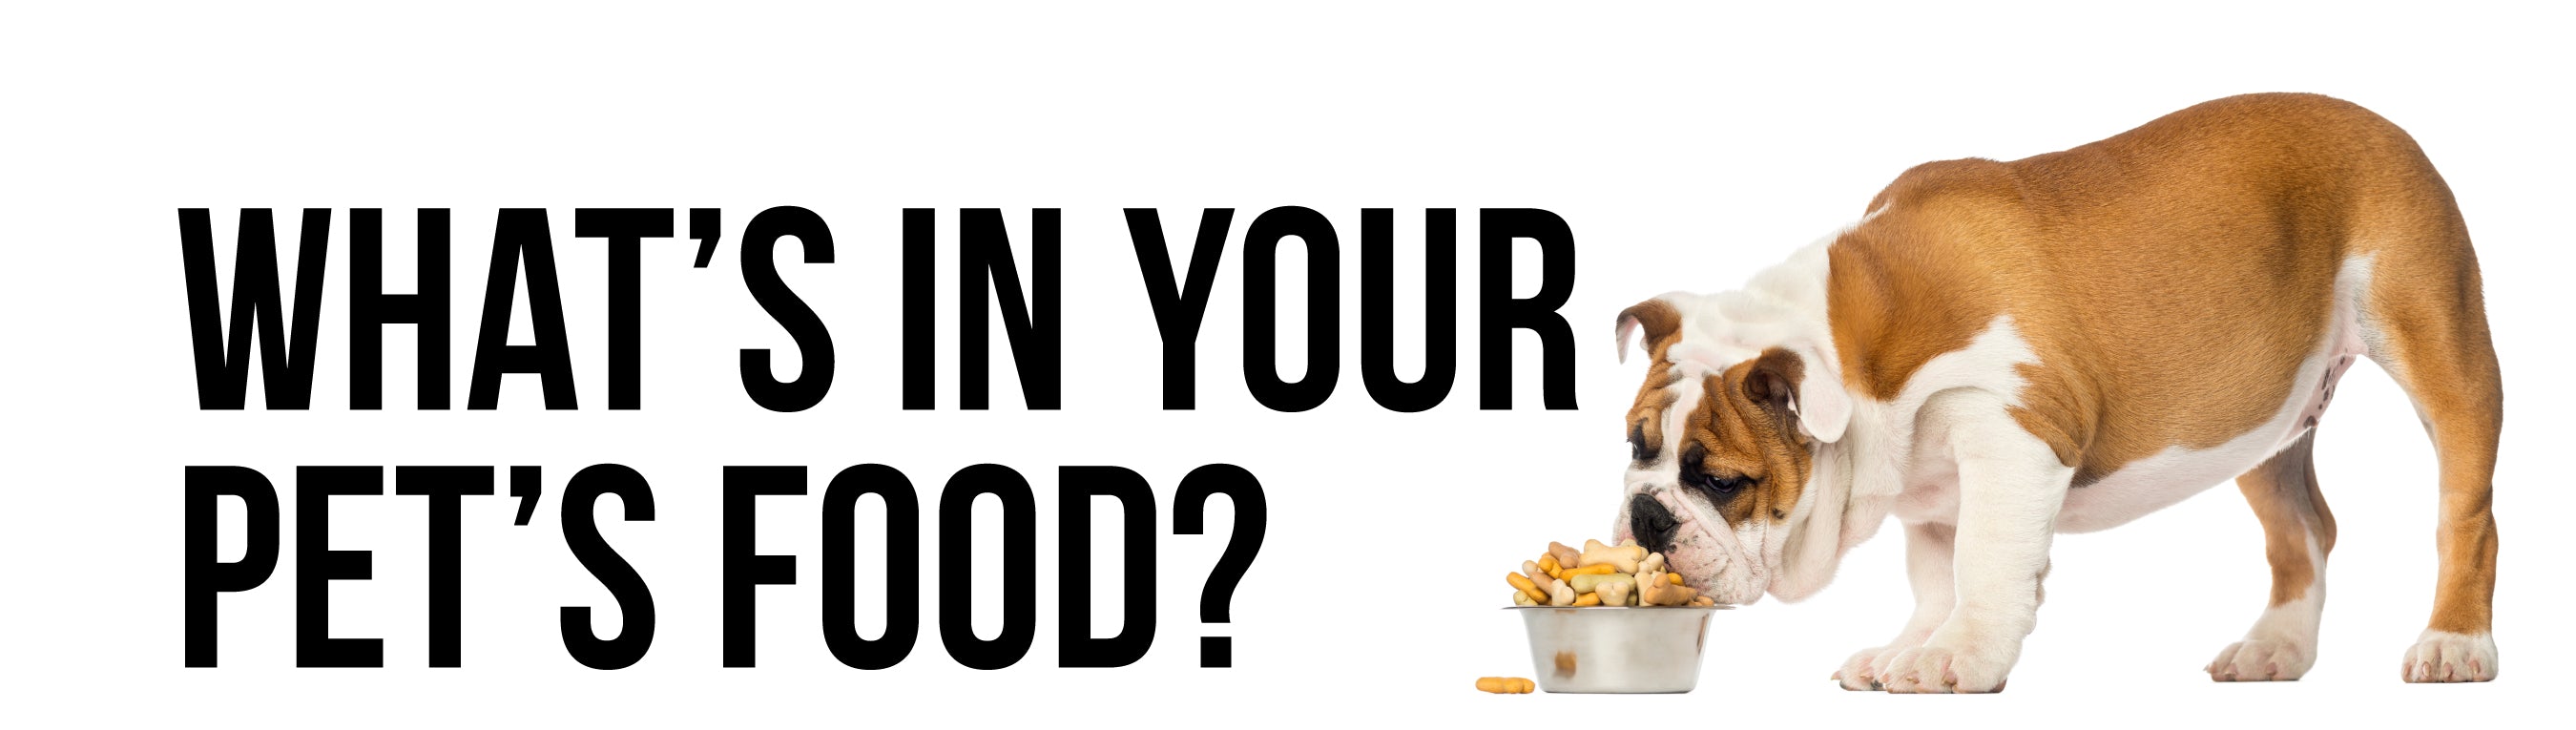 whats in your pets food